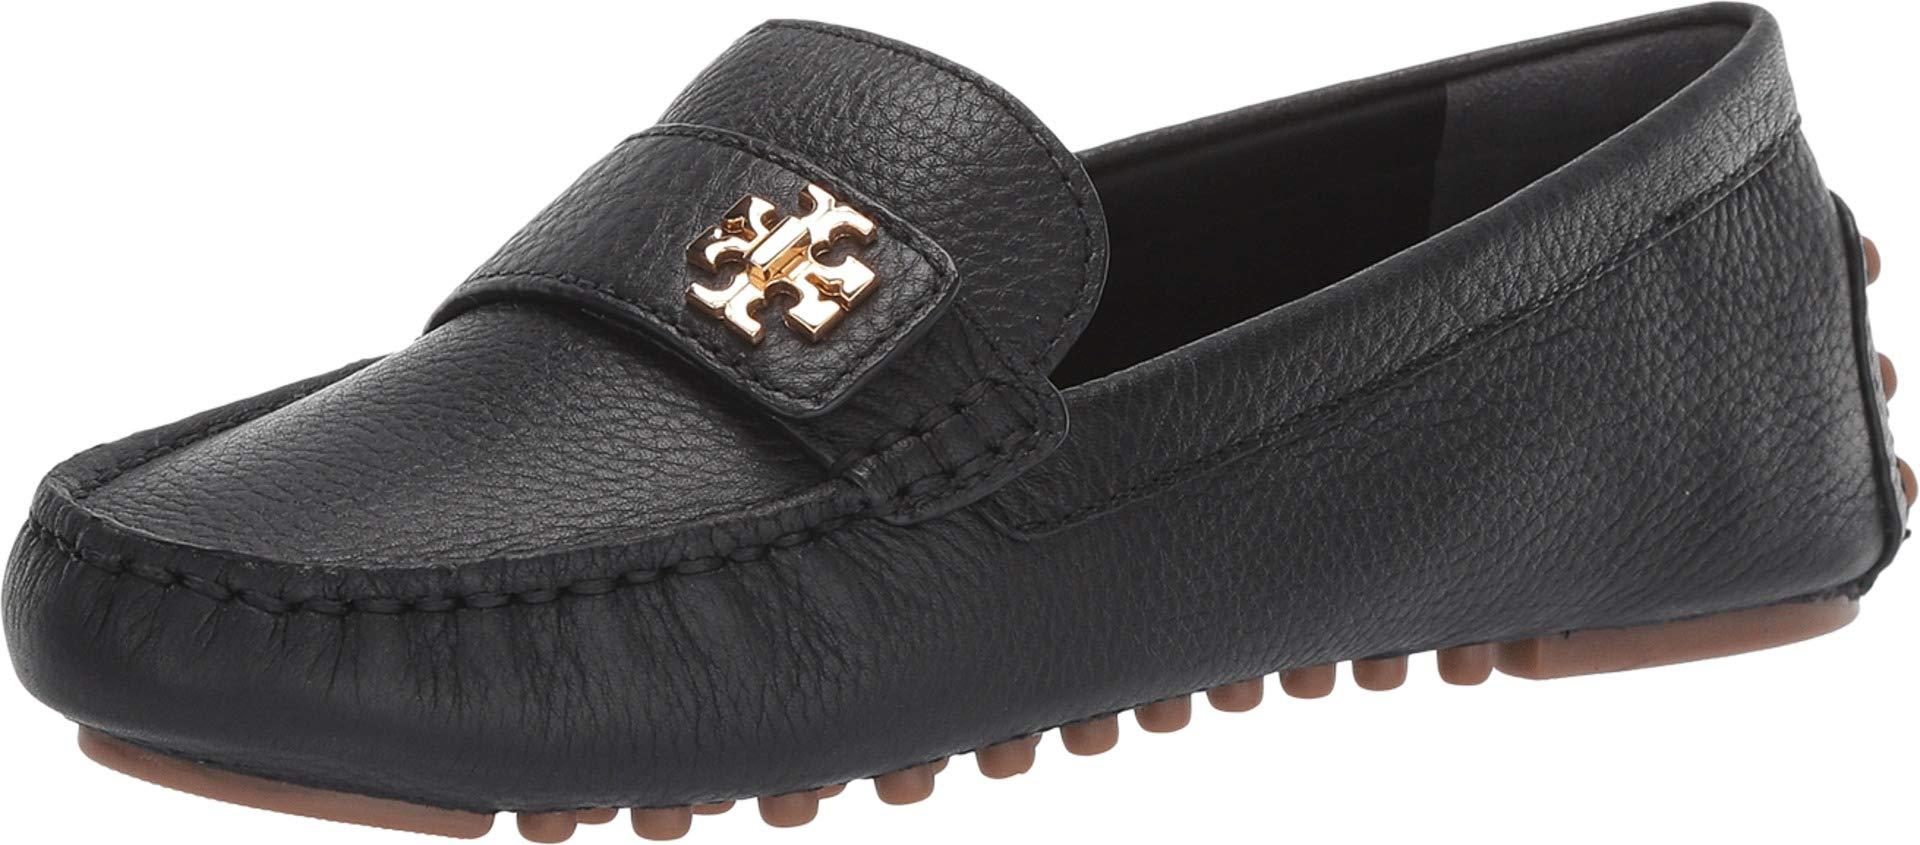 Tory Burch Kira Driving Loafer in Black 